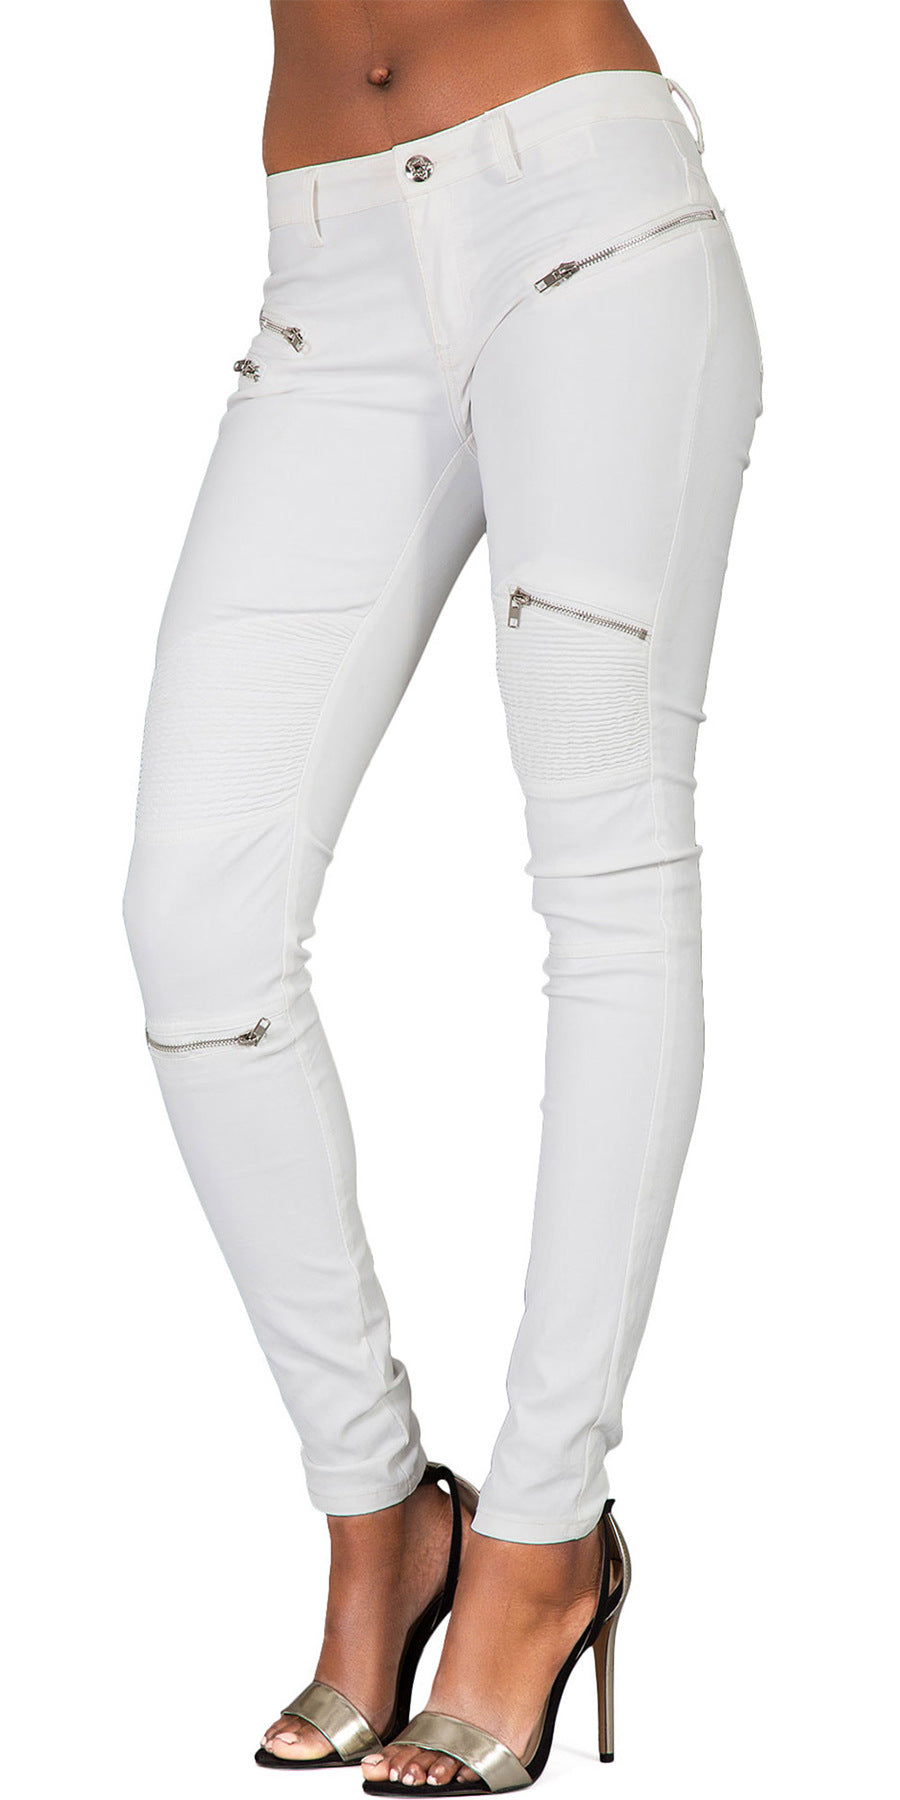 Faux Leather Denim Pants Spliced with Multiple Zippers